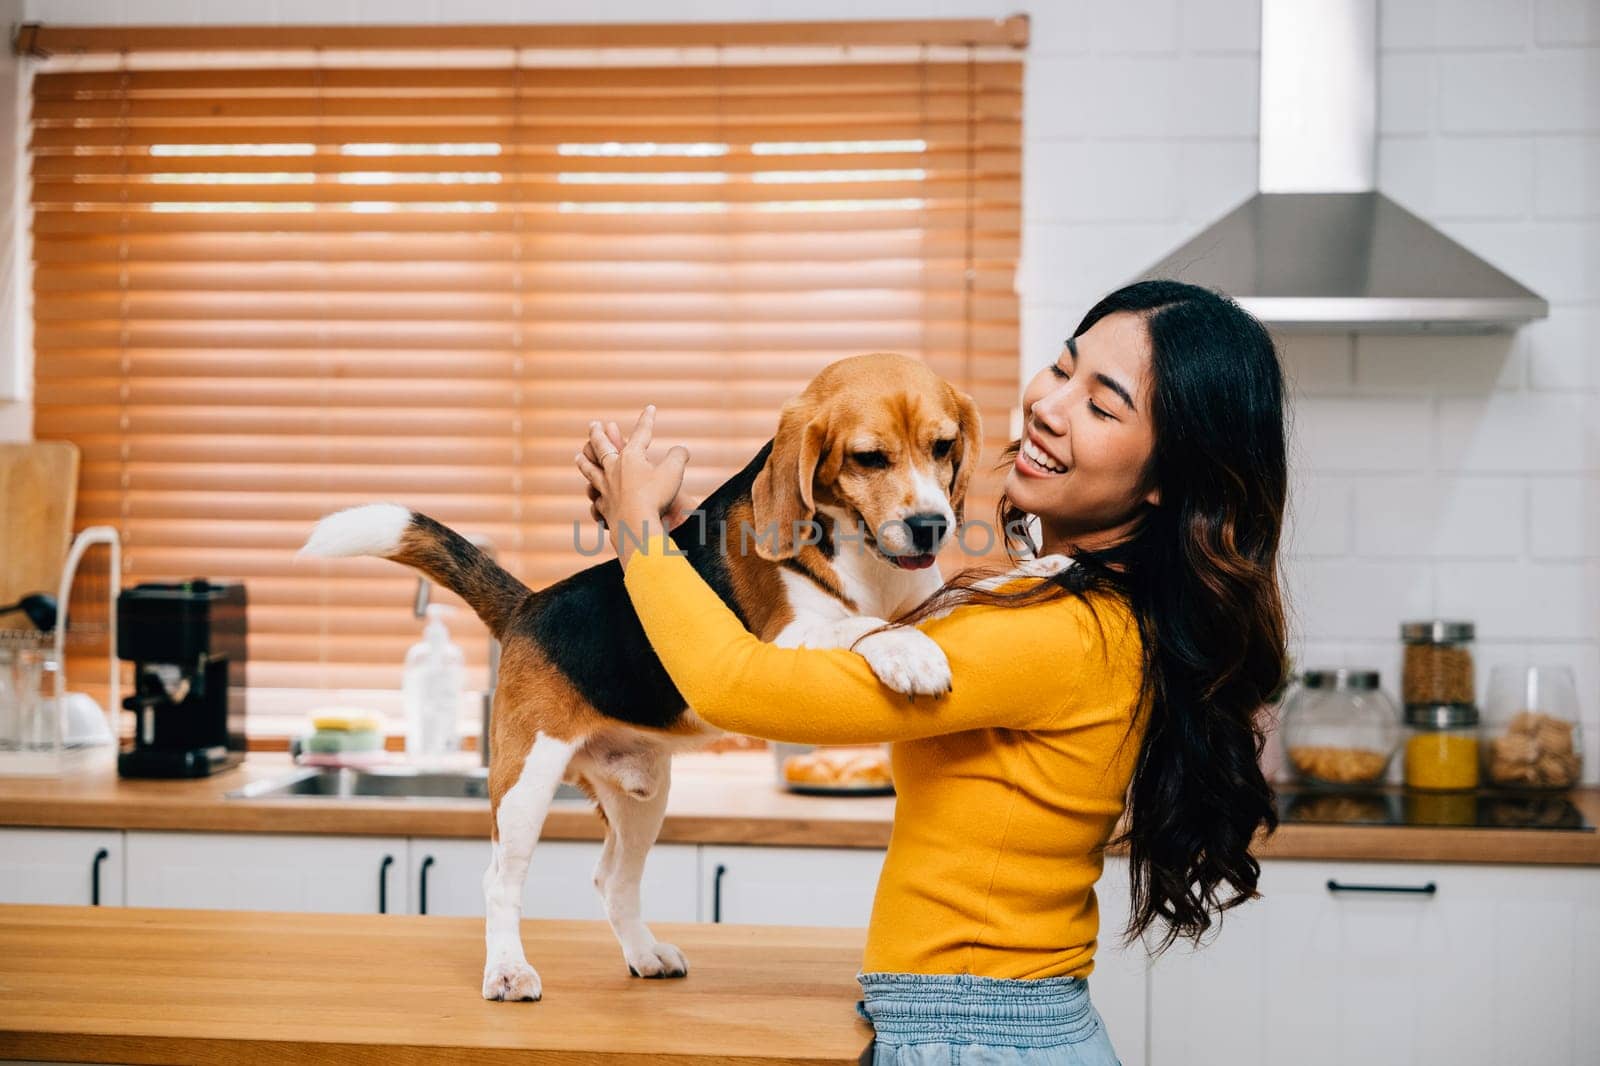 In the cozy kitchen, a smiling Asian woman finds joy playing with her Beagle dog. Their bond showcases the happiness, togetherness, and owner-pet friendship that bring fun to the family. Pet love